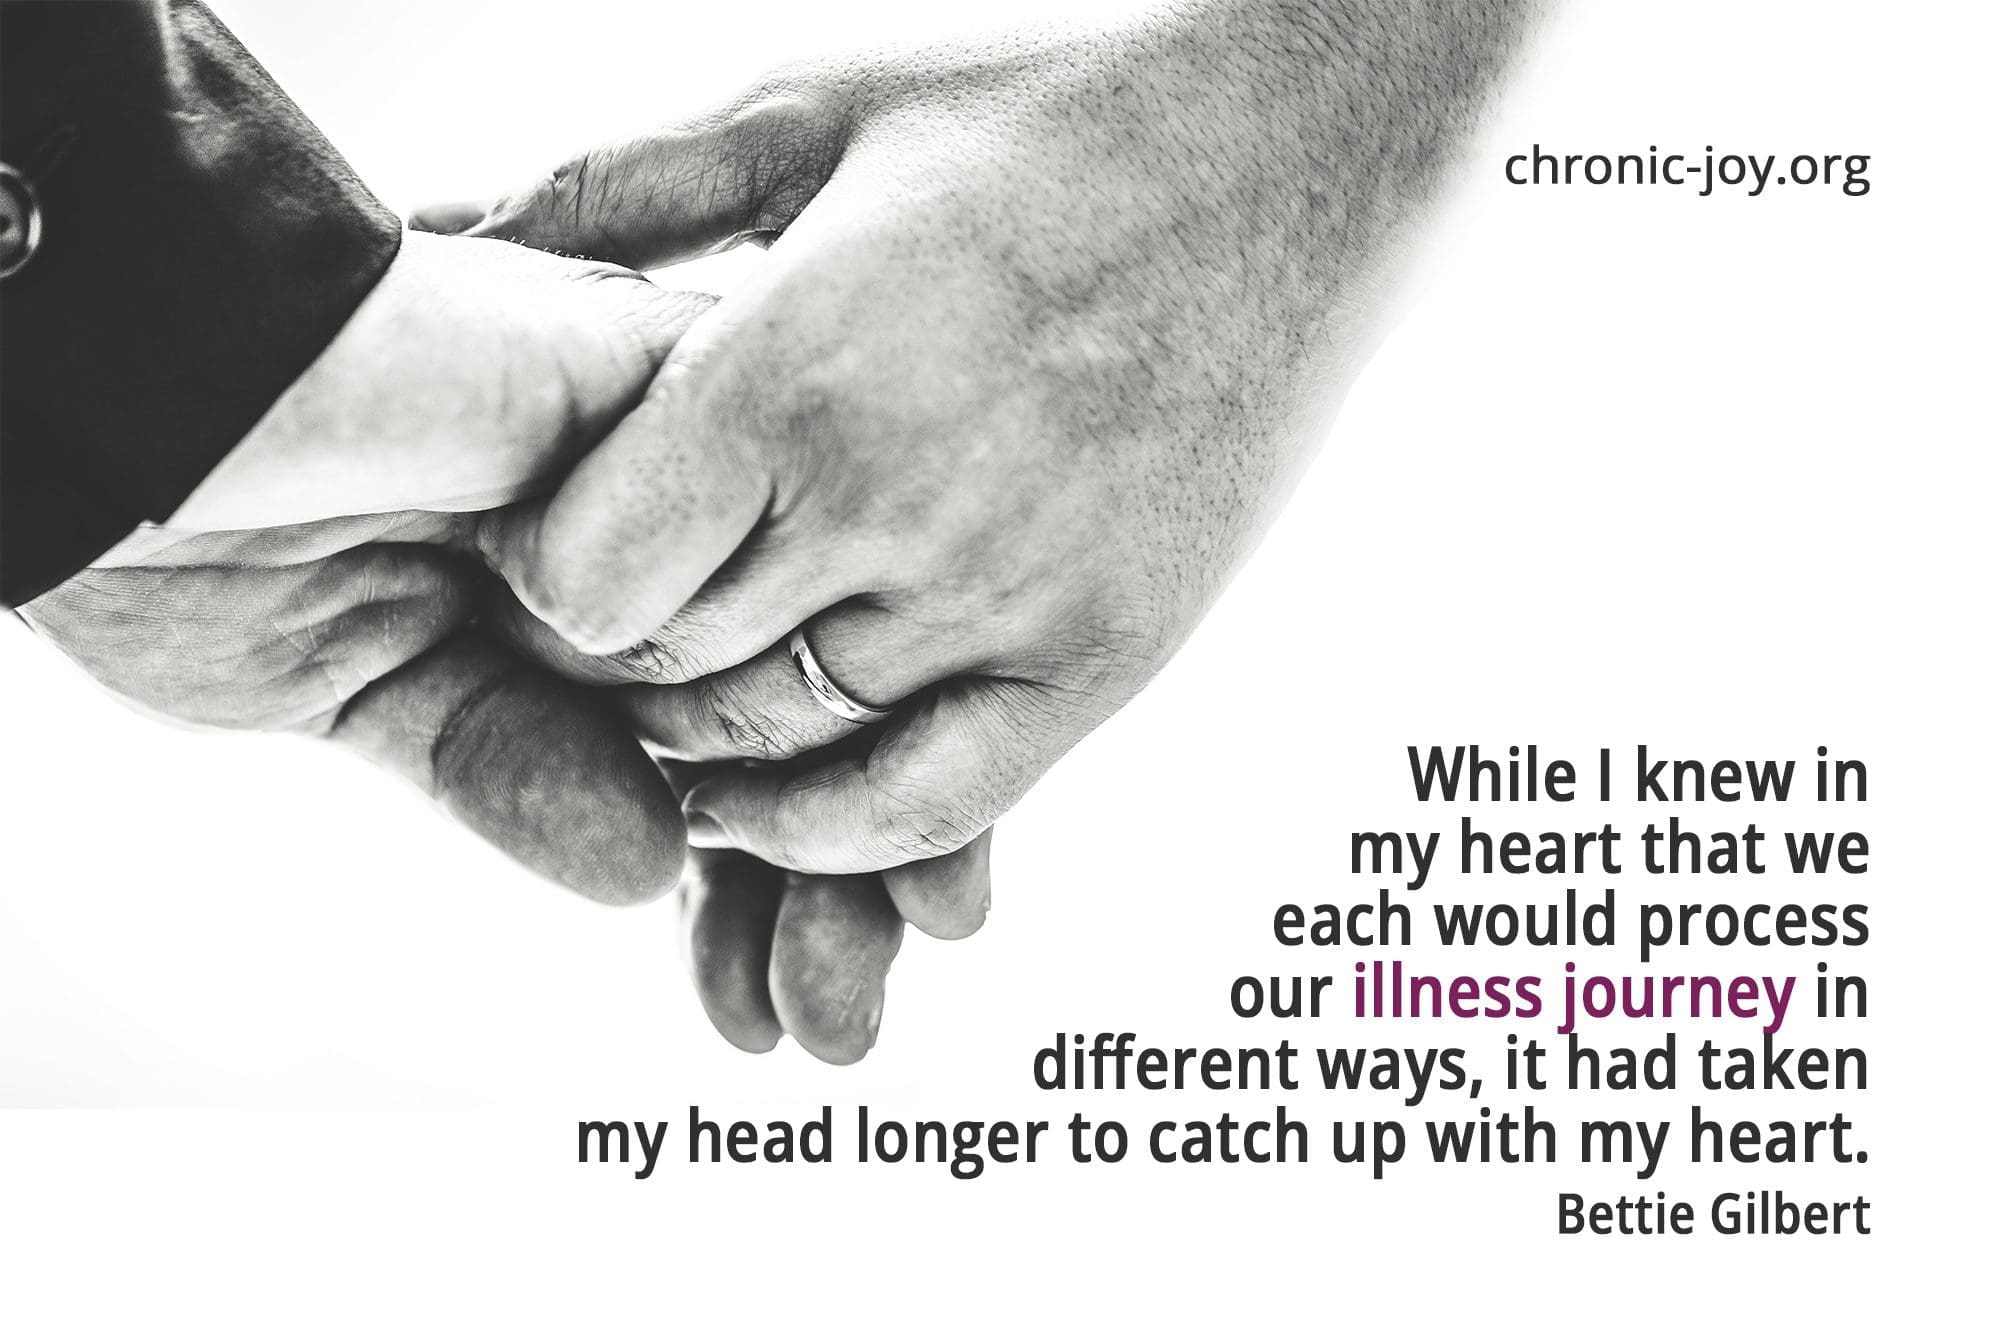 "While I knew in my heart that we would each process our illness journey in different ways, it had taken longer to catch up with my heart." Bettie Gilbert